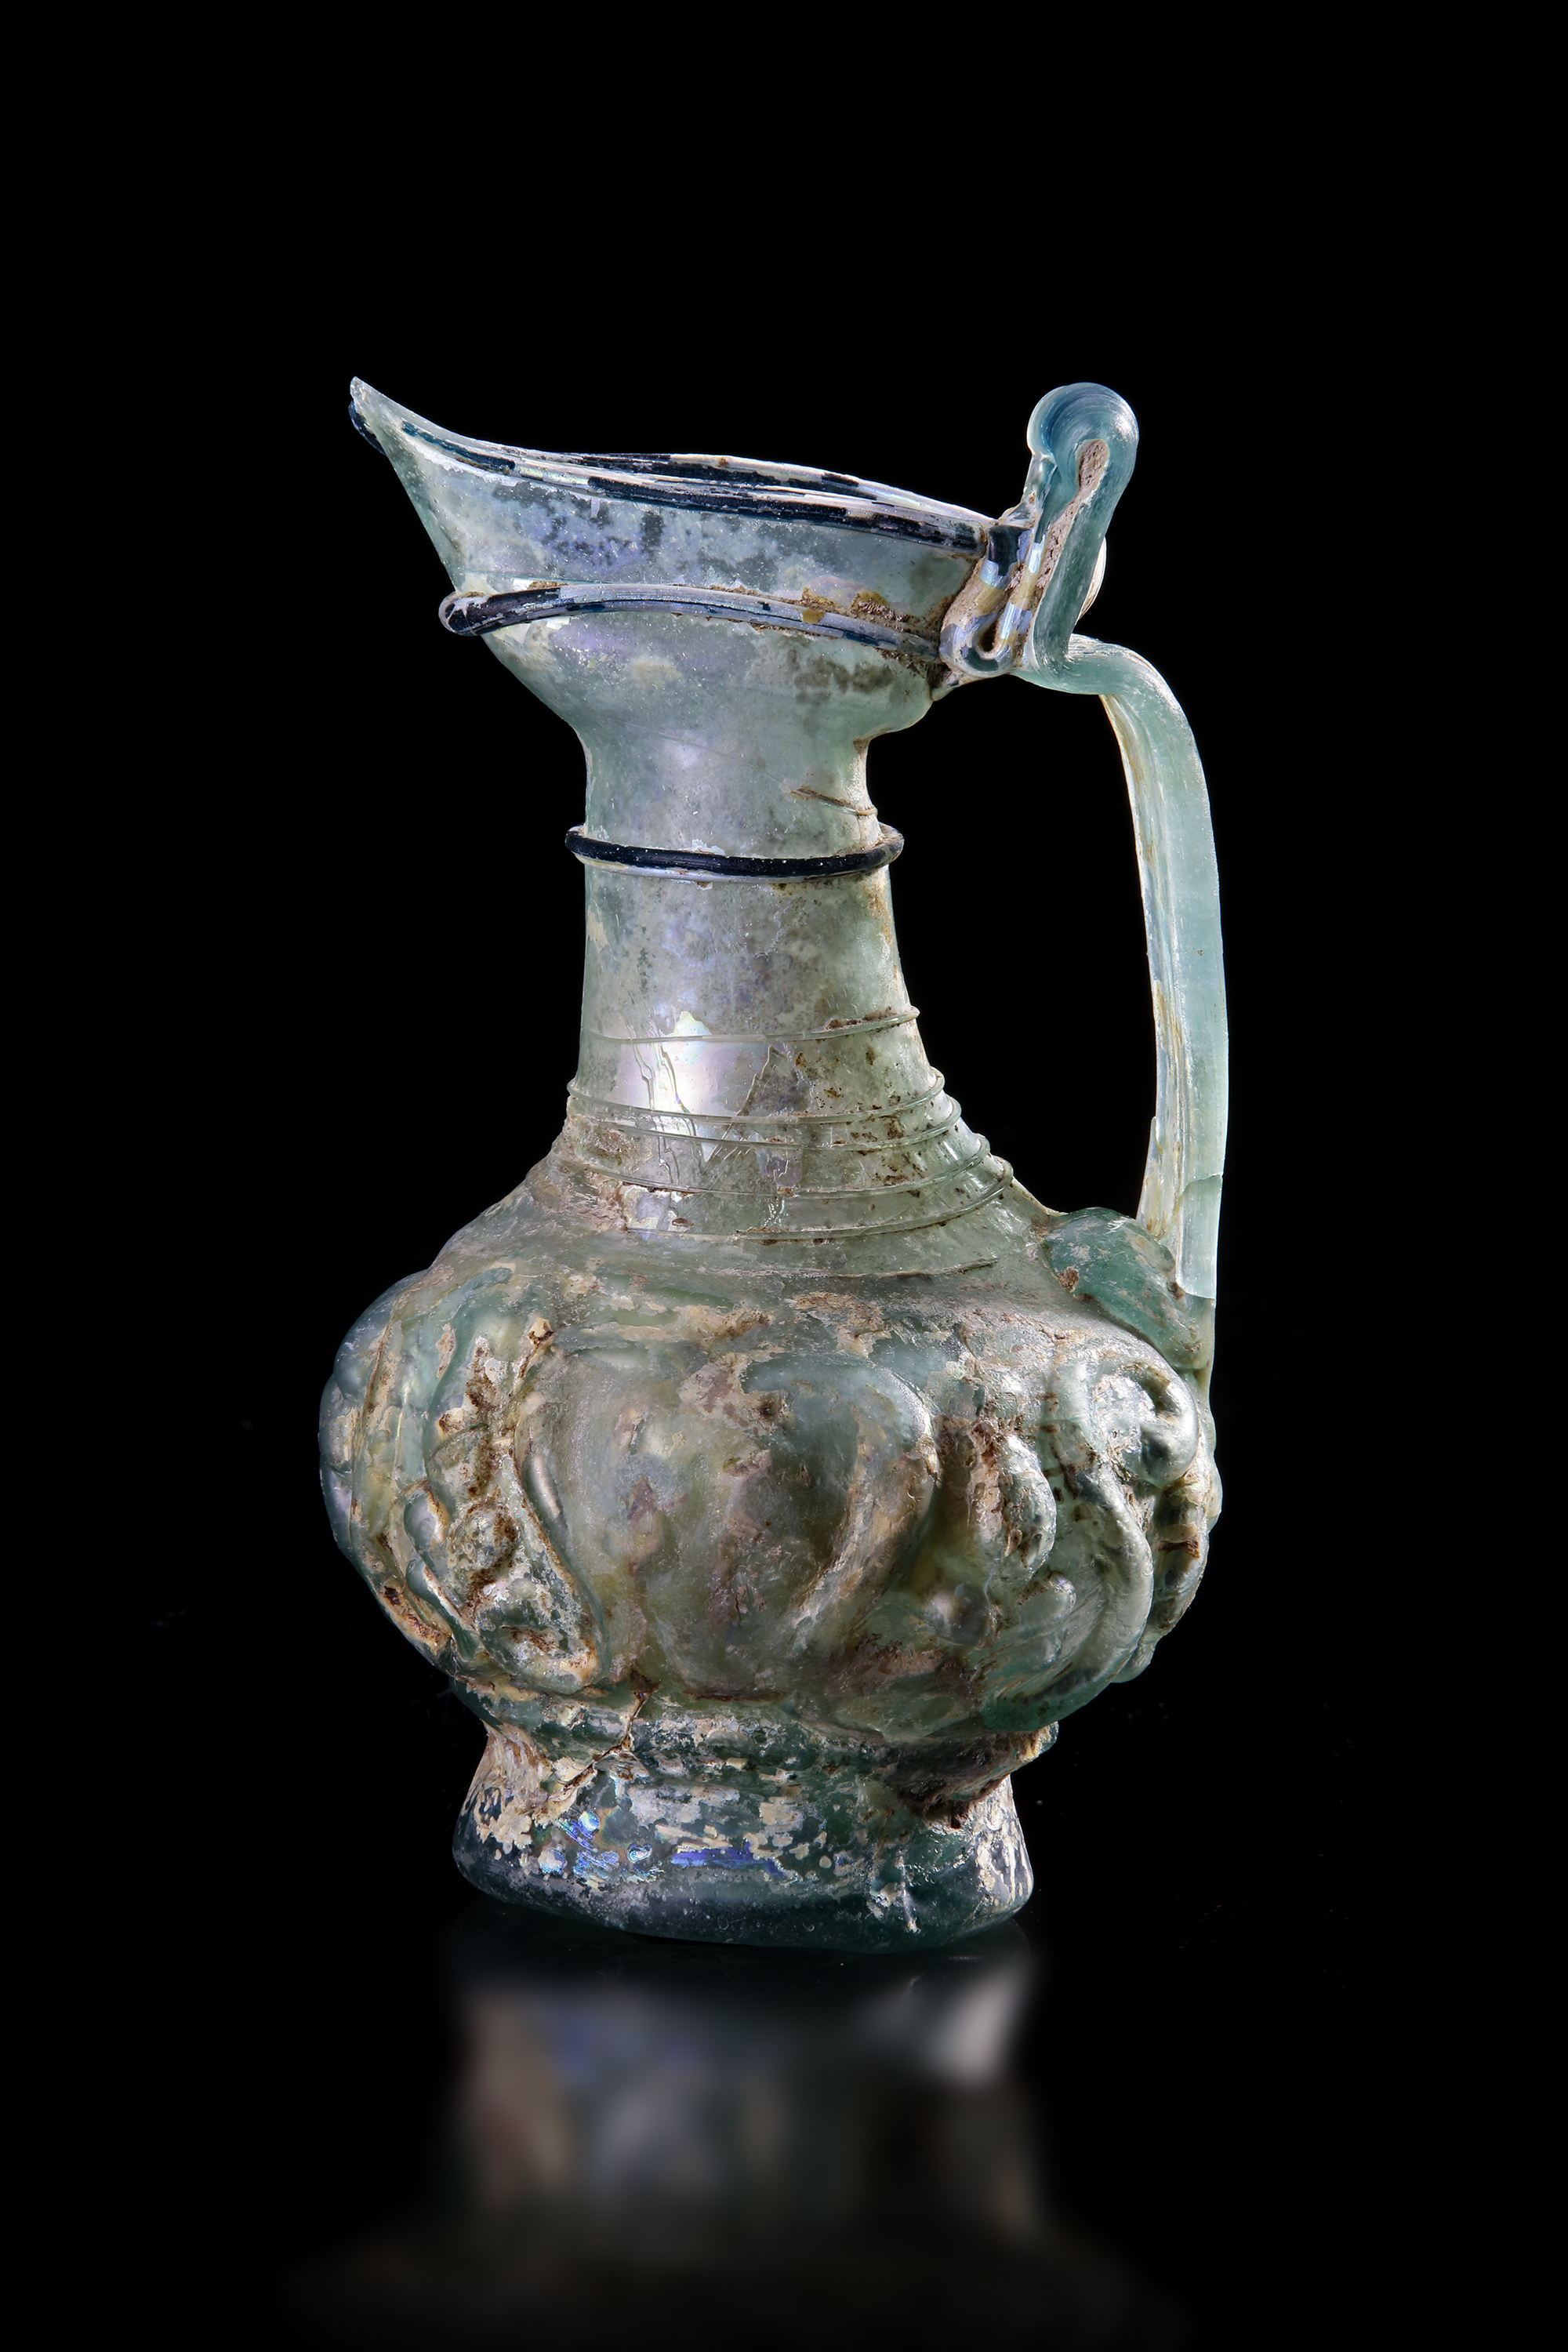 A GLASS EWER WITH SPOUT, PERSIA, 10TH-12TH CENTURY - Image 2 of 12